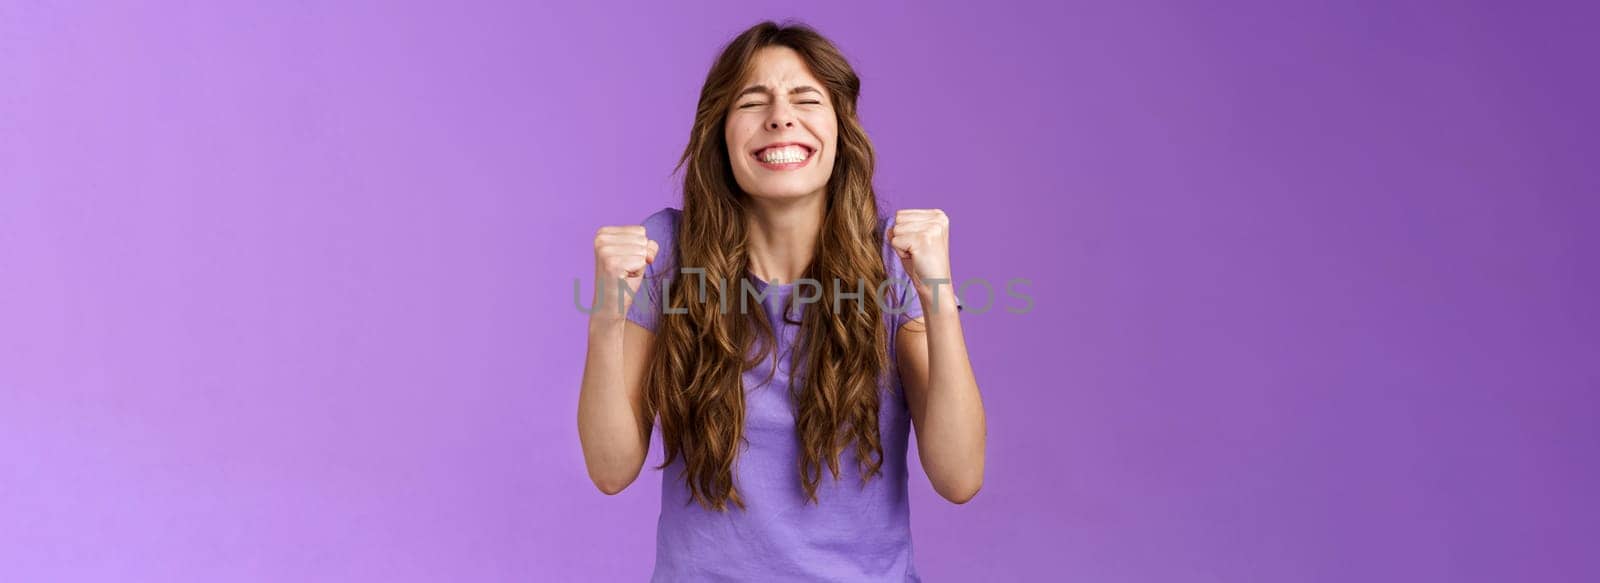 Yes I did it. Relieved happy triumphing joyful girl pump fists celebrating excellent achievement raise head up close eyes thank god winning first prize stand purple background happy.